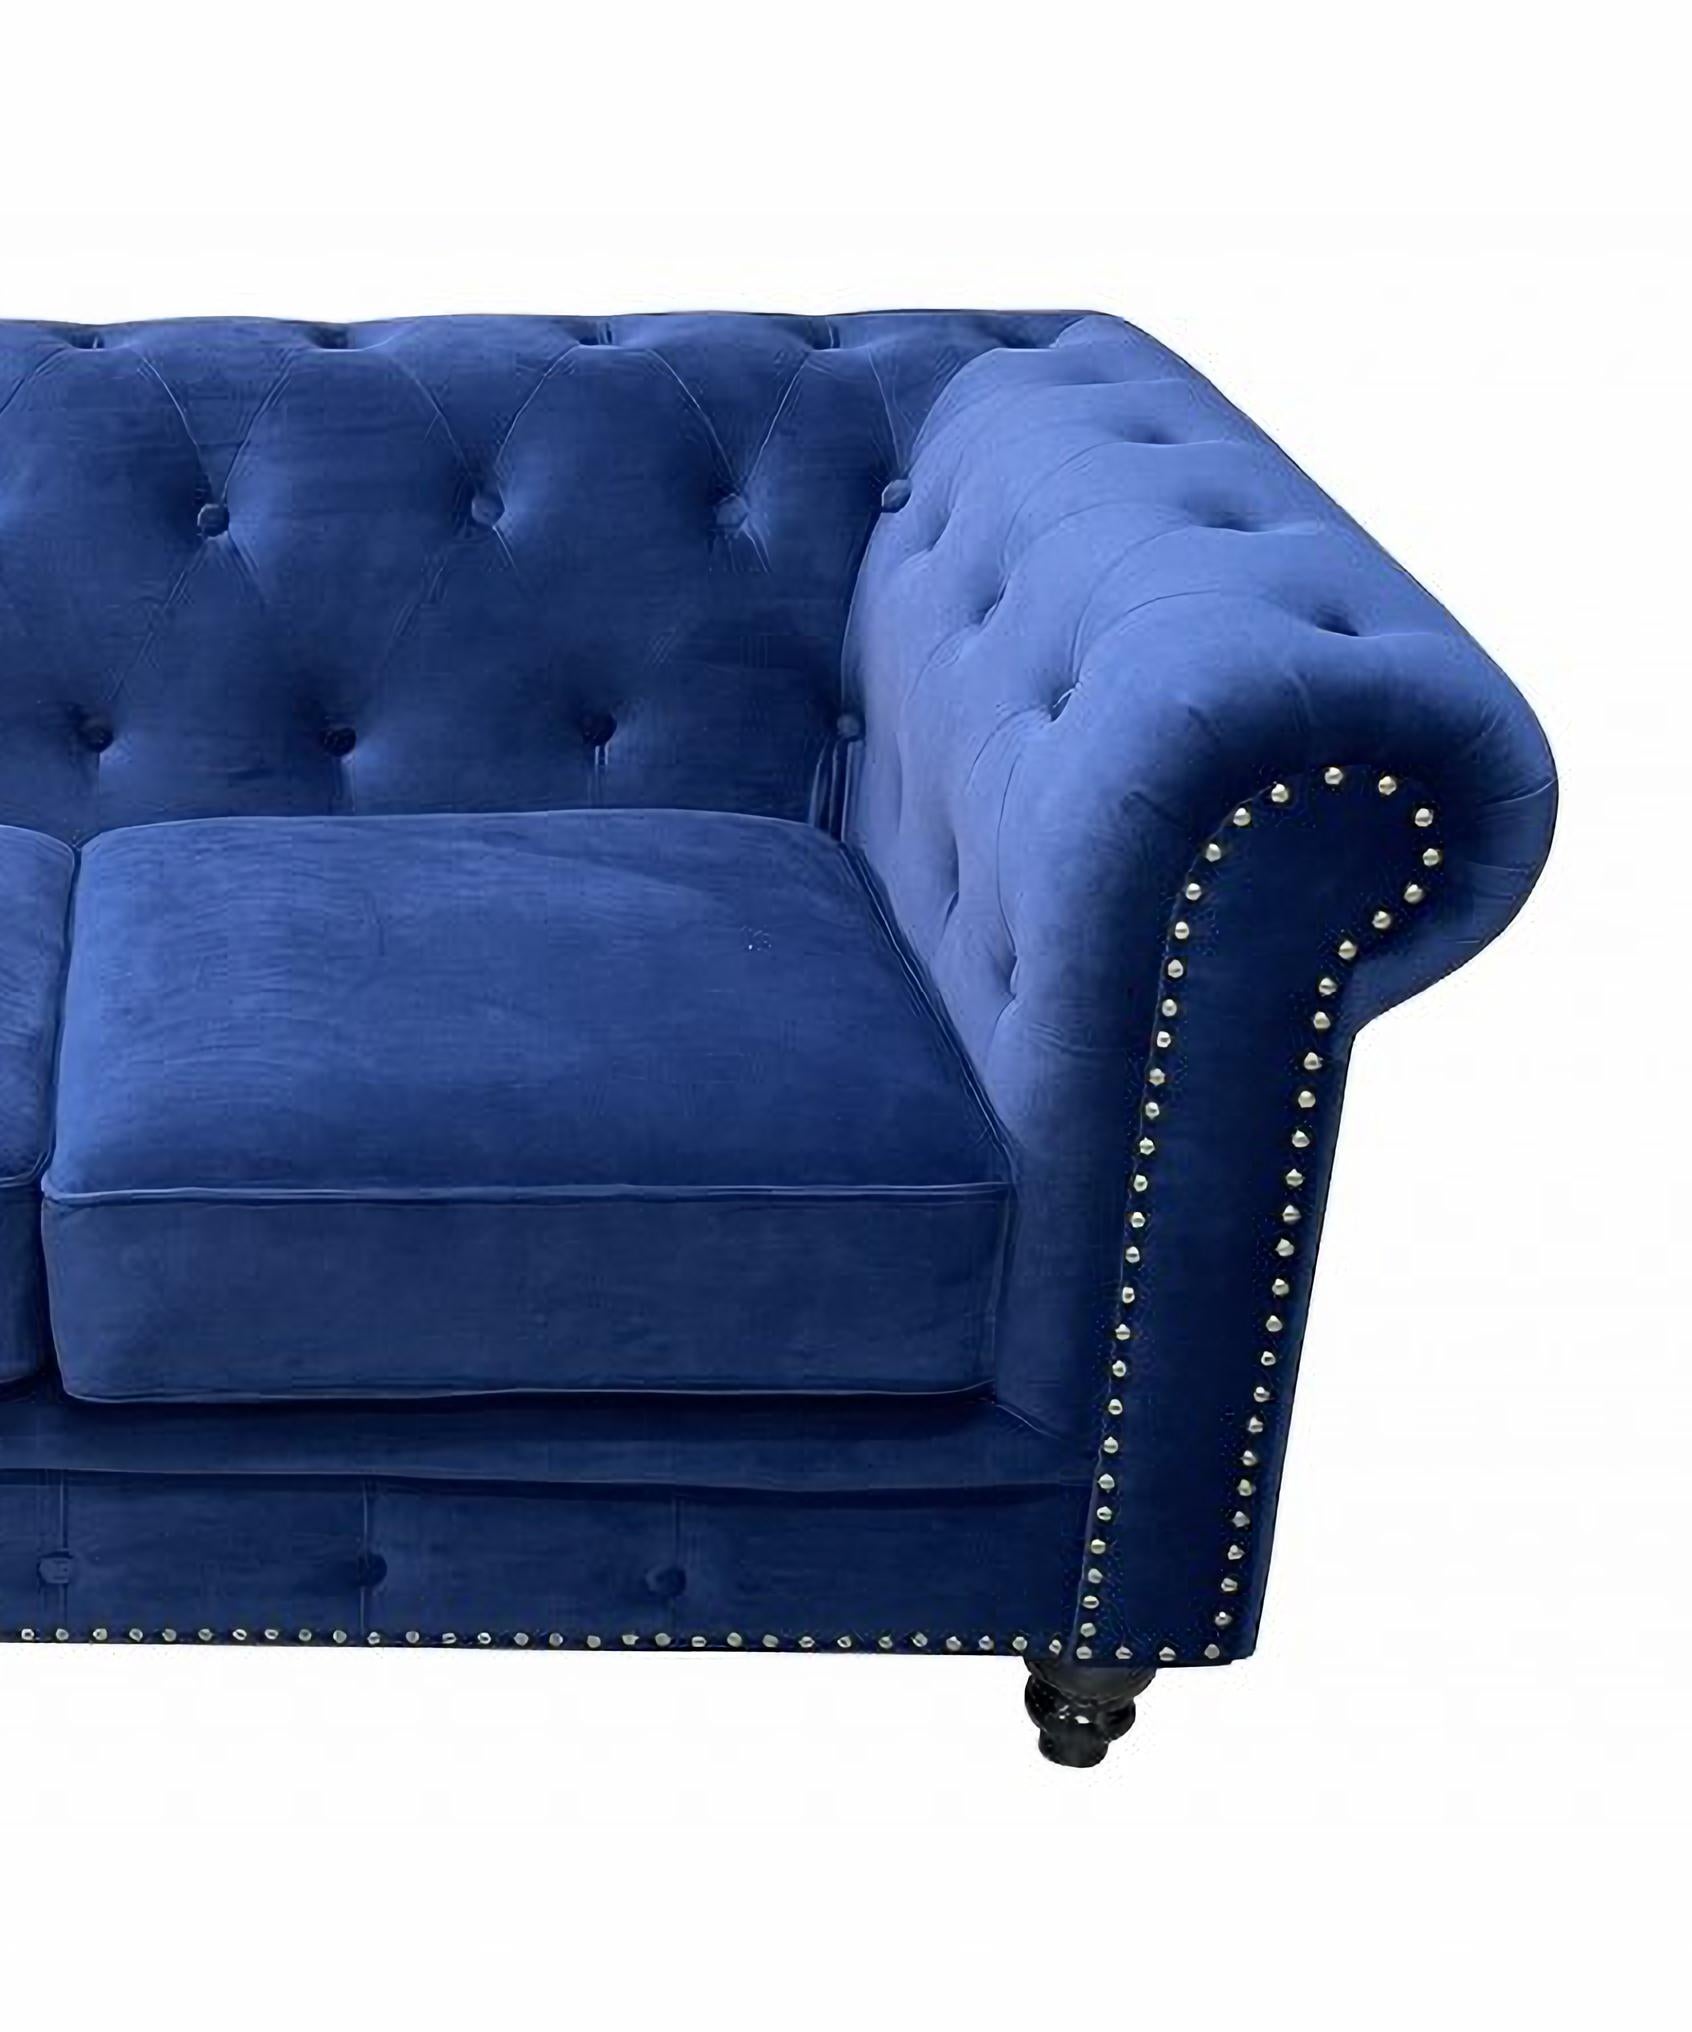 CHESTER PREMIUM 2 seater sofa, navy blue velvet upholstery

-Design sofa, 2 seats.

-Made with a solid wooden structure.

-High density polyurethane foam.

-Upholstered in navy blue velvet fabric

-2-seater sofa to match,